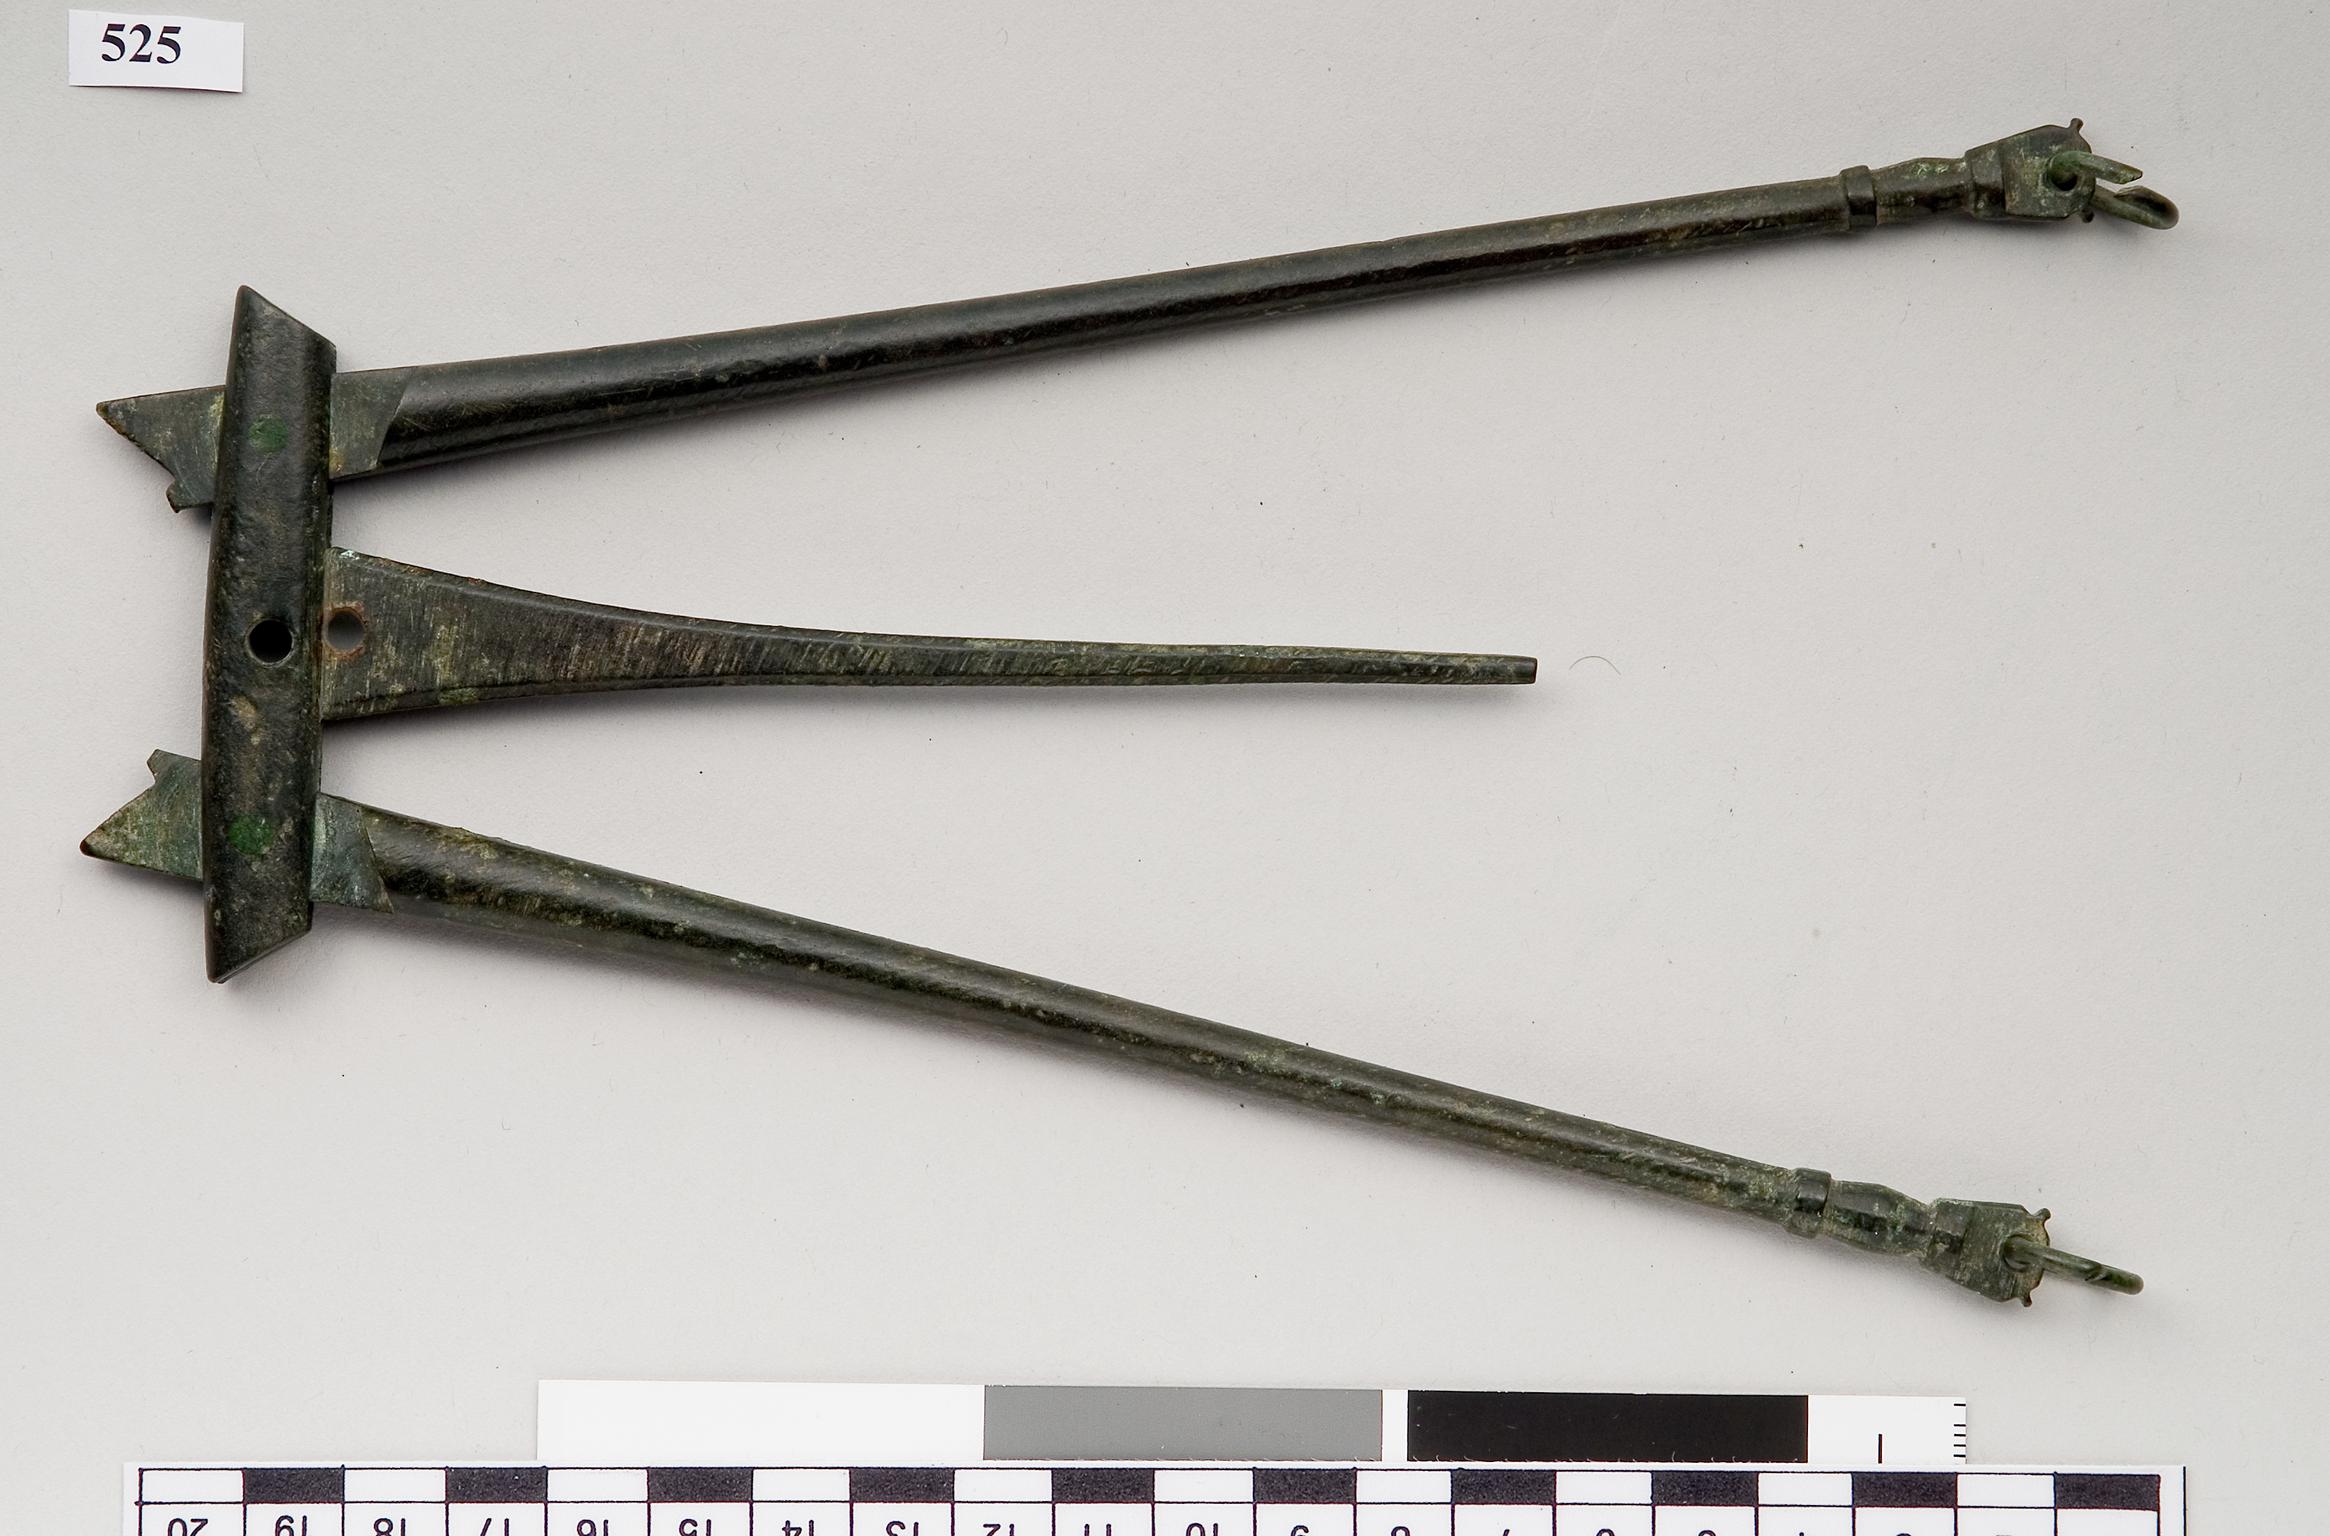 Medieval copper alloy scales